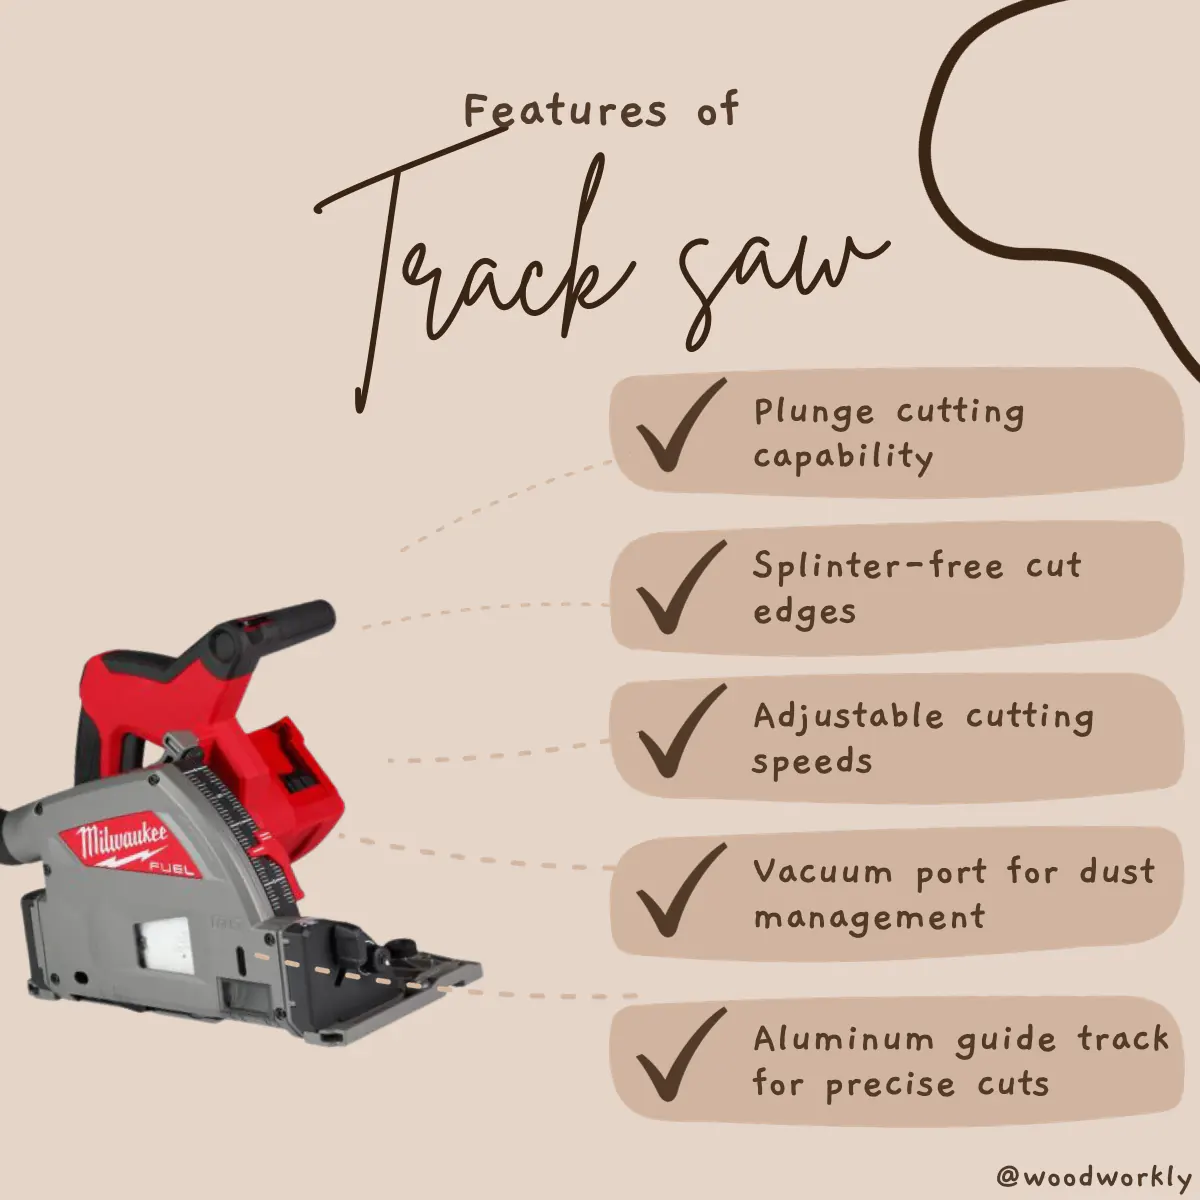 Features of Track Saw